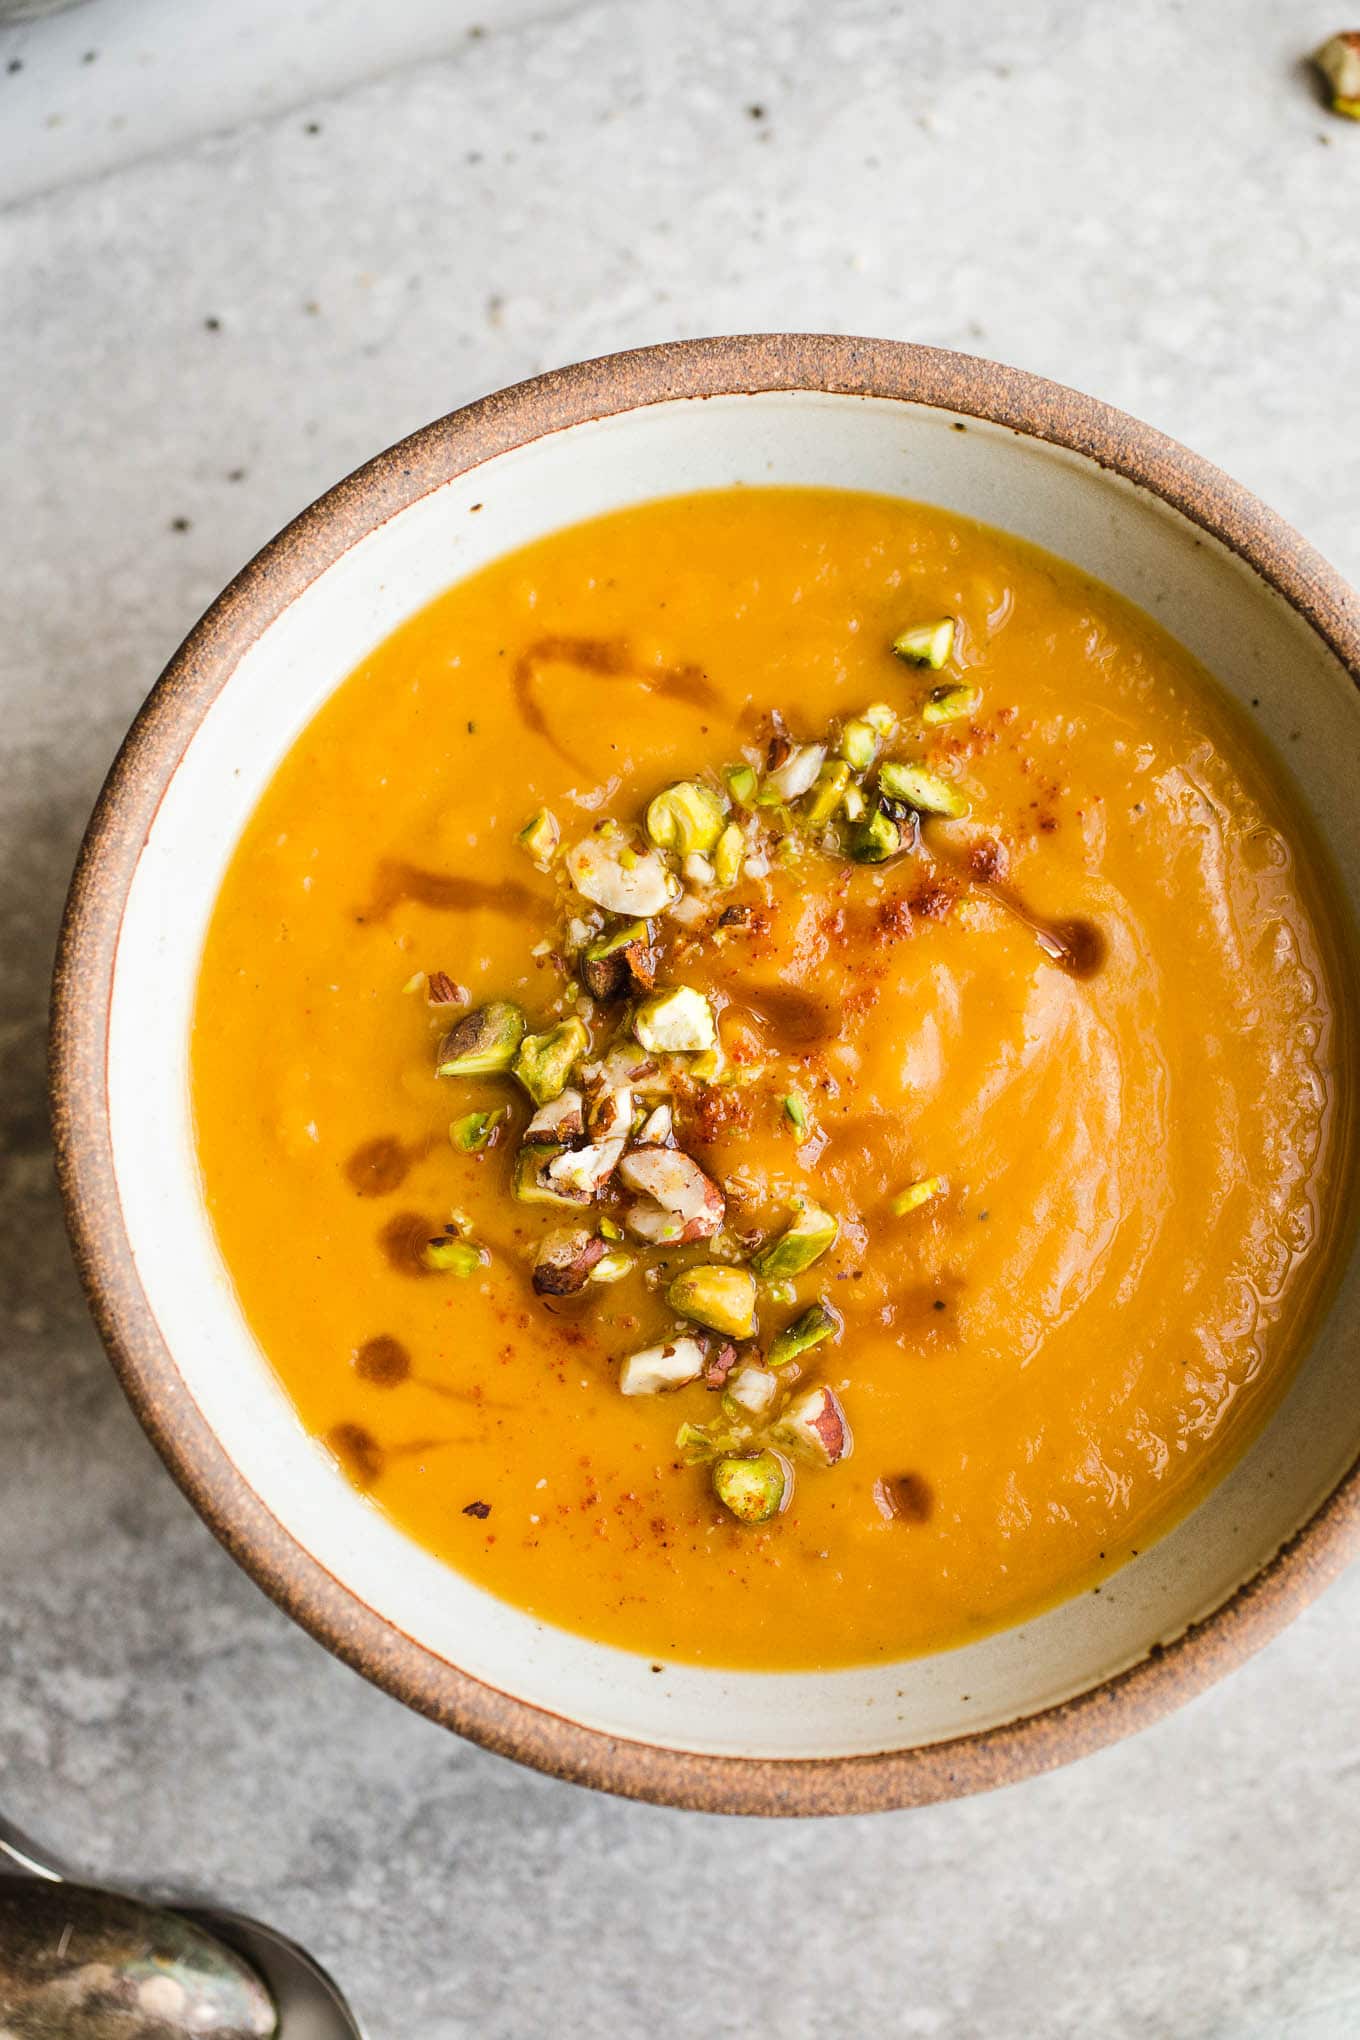 A rustic bowl filled with orange sweet potato soup and garnished with chopped nuts.